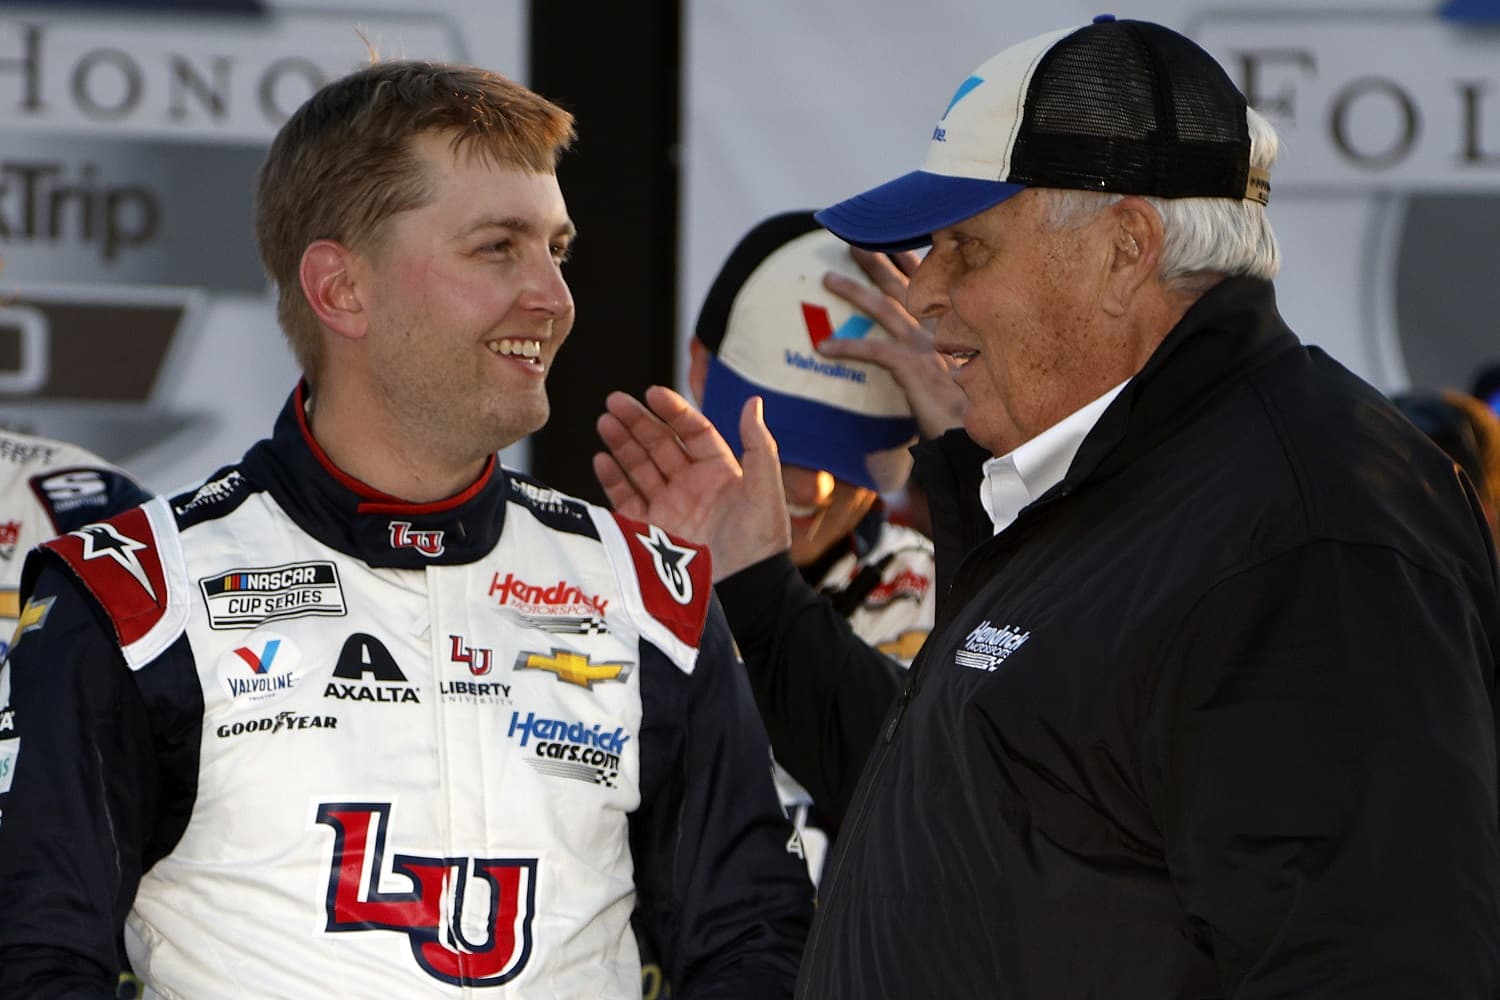 William Byron is congratulated by Hendrick Motorsports owner Rick Hendrick in Victory Lane after winning the NASCAR Cup Series Folds of Honor QuikTrip 500 at Atlanta Motor Speedway on March 20, 2022. | Sean Gardner/Getty Images